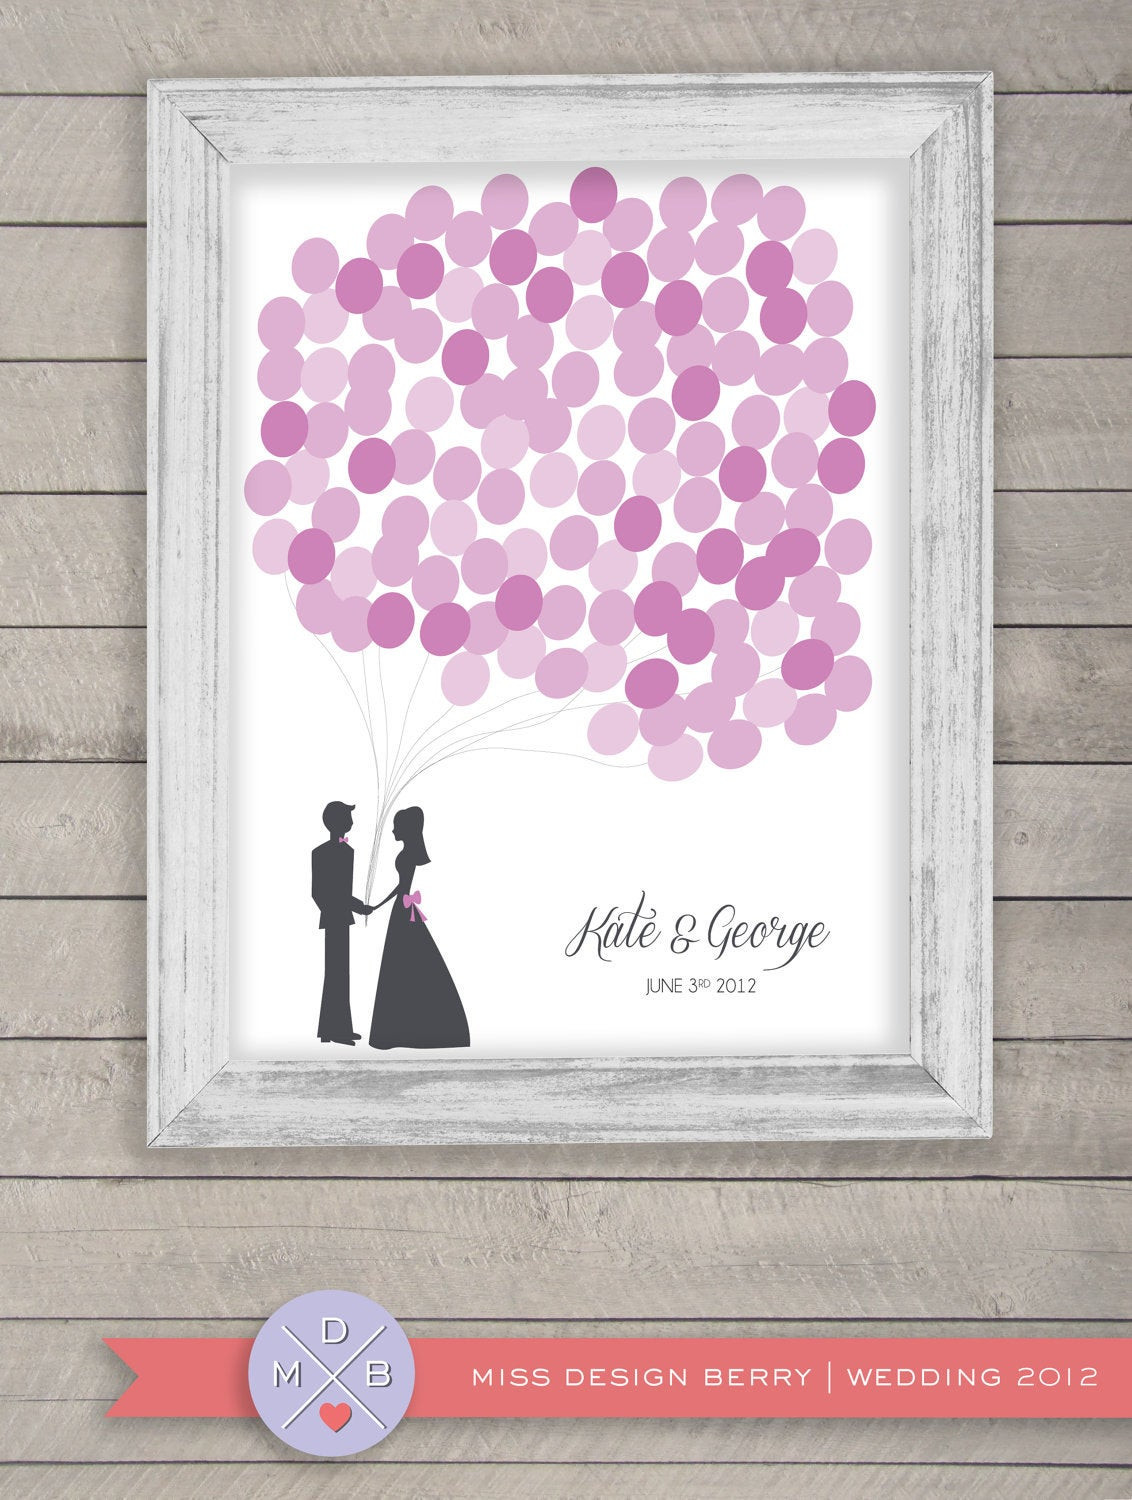 Wedding Guest Book Balloons
 Alternative Guest Books on Etsy